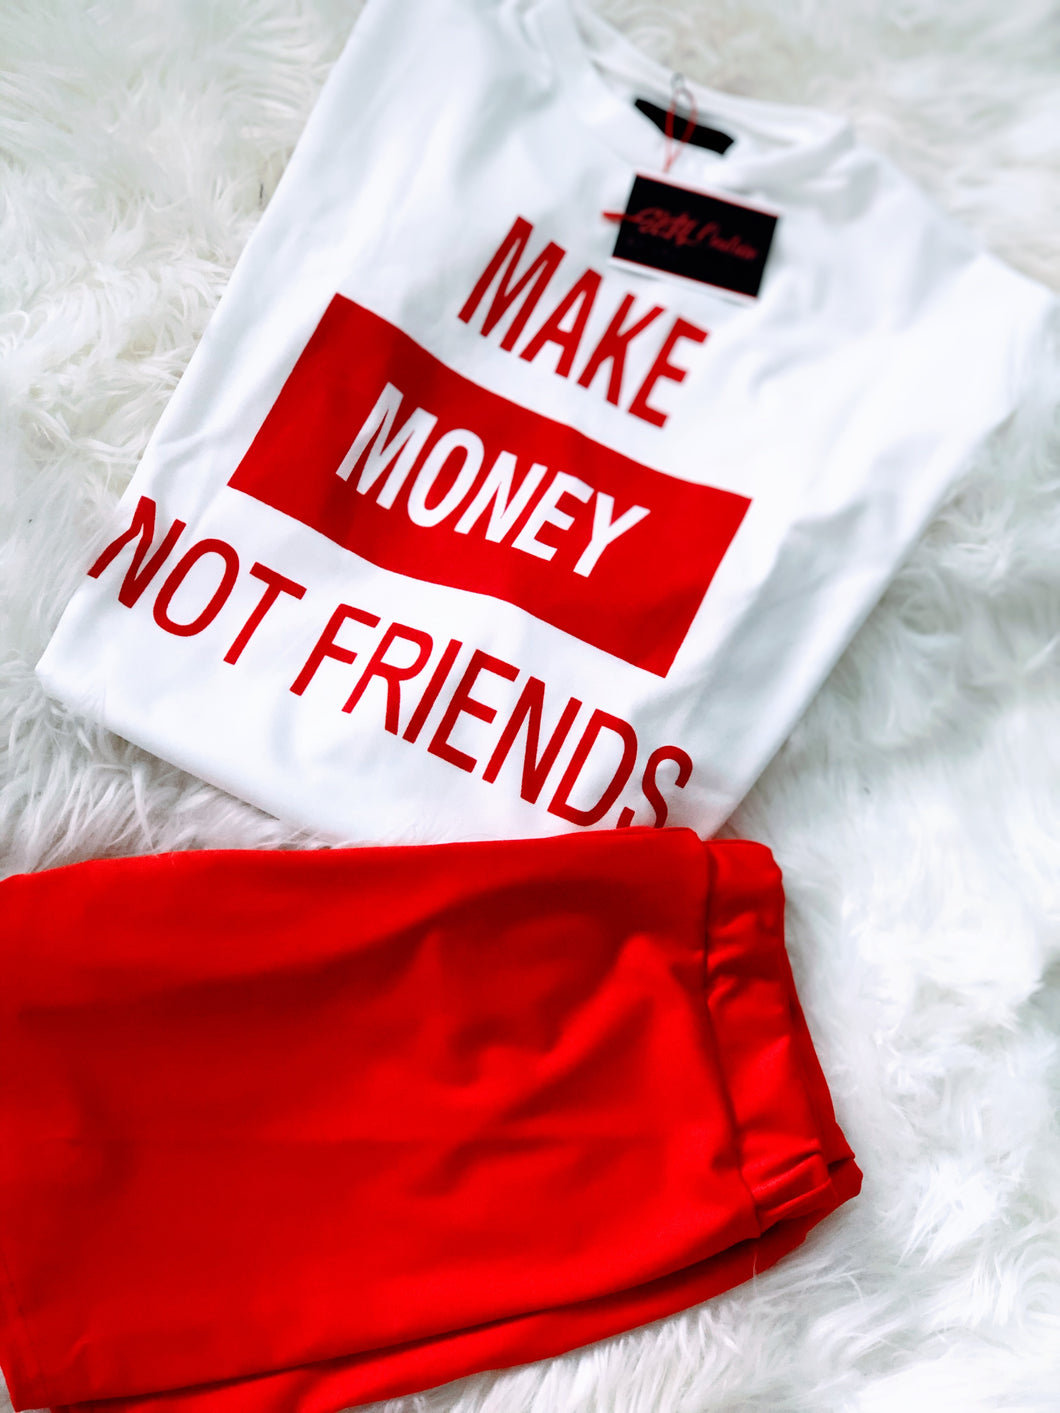 Athleisure Make Money Not Friends Set - Plus Size Available (Pre-Order)